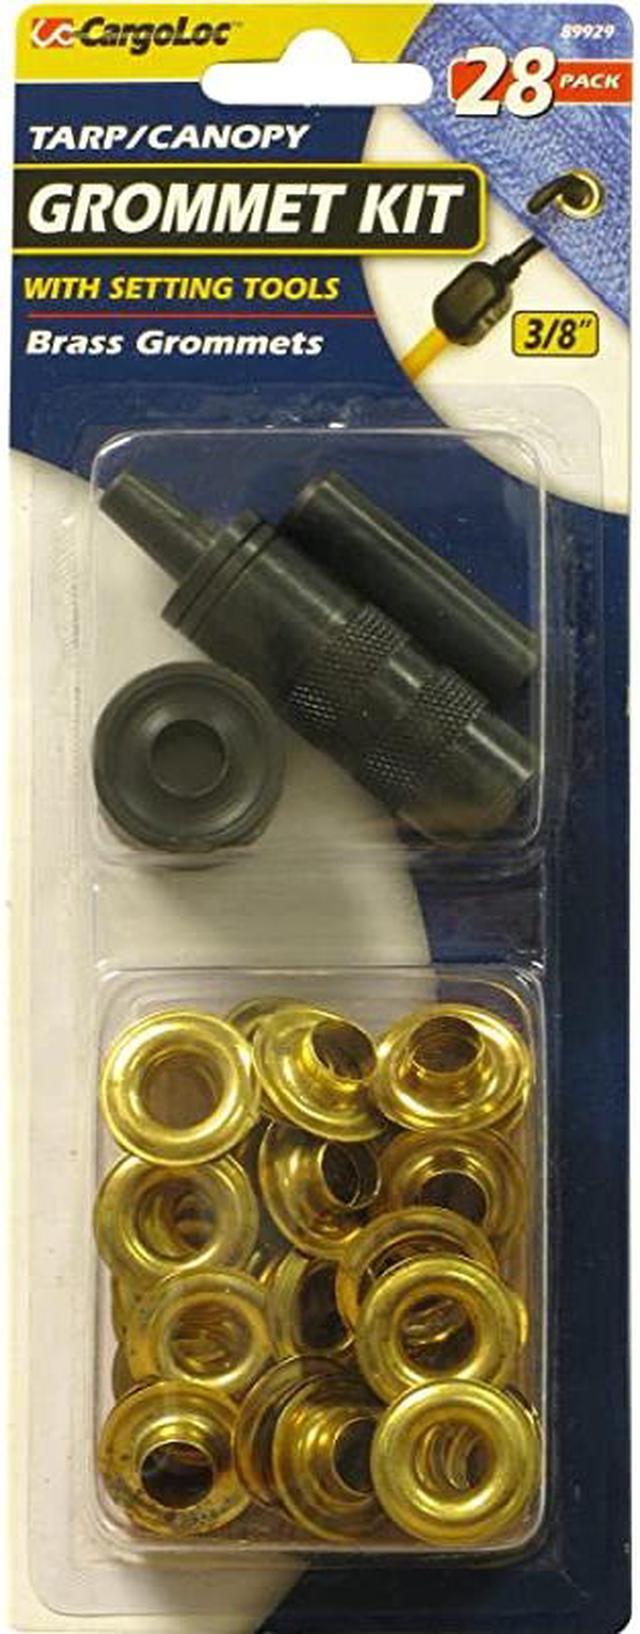 89929 28 Pc 38quot Grommet Kit and Tools Brass 